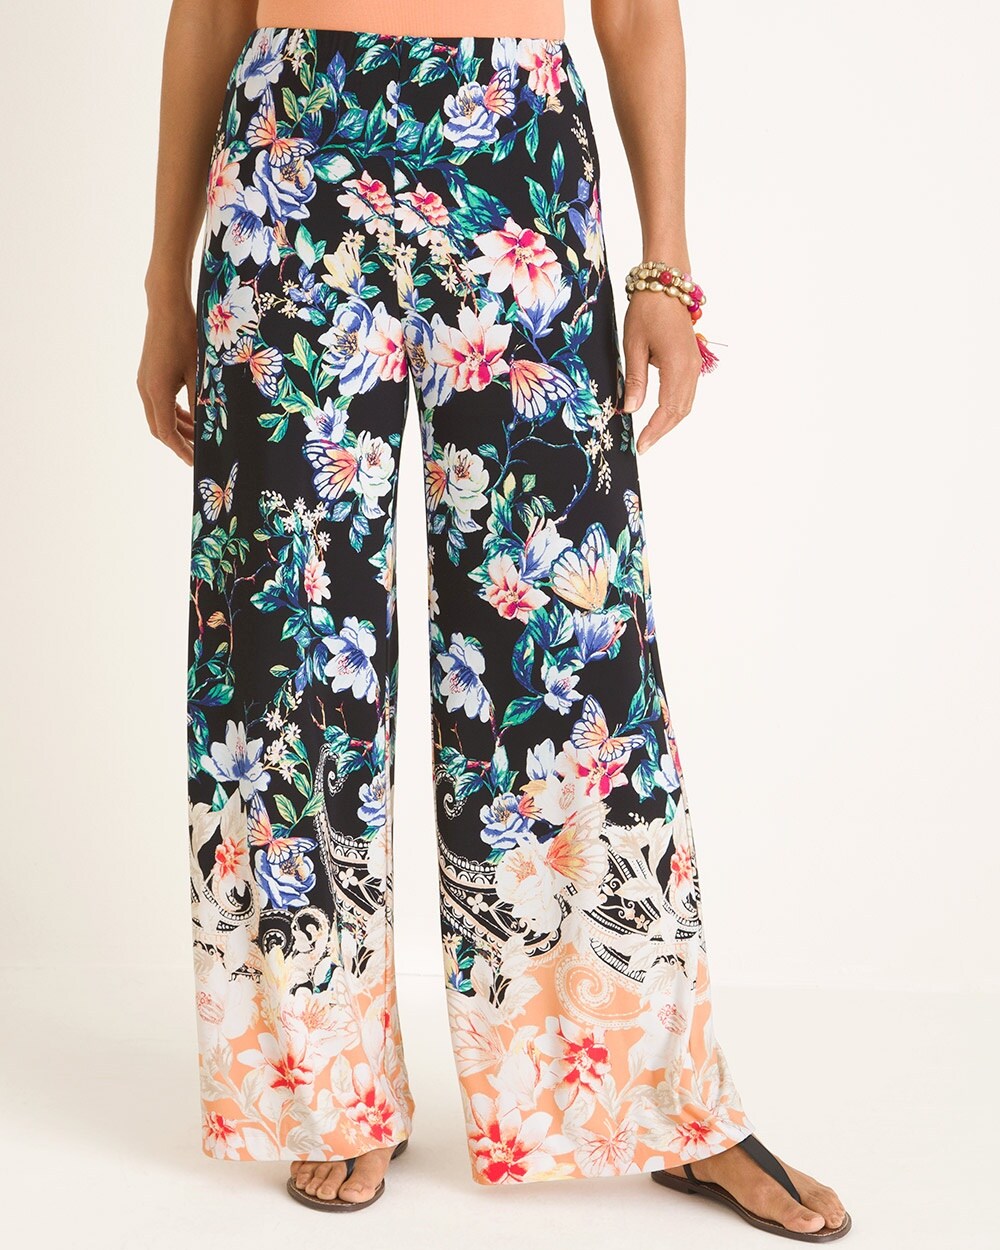 Butterfly Garden-Print Palazzo Pants - Chico's